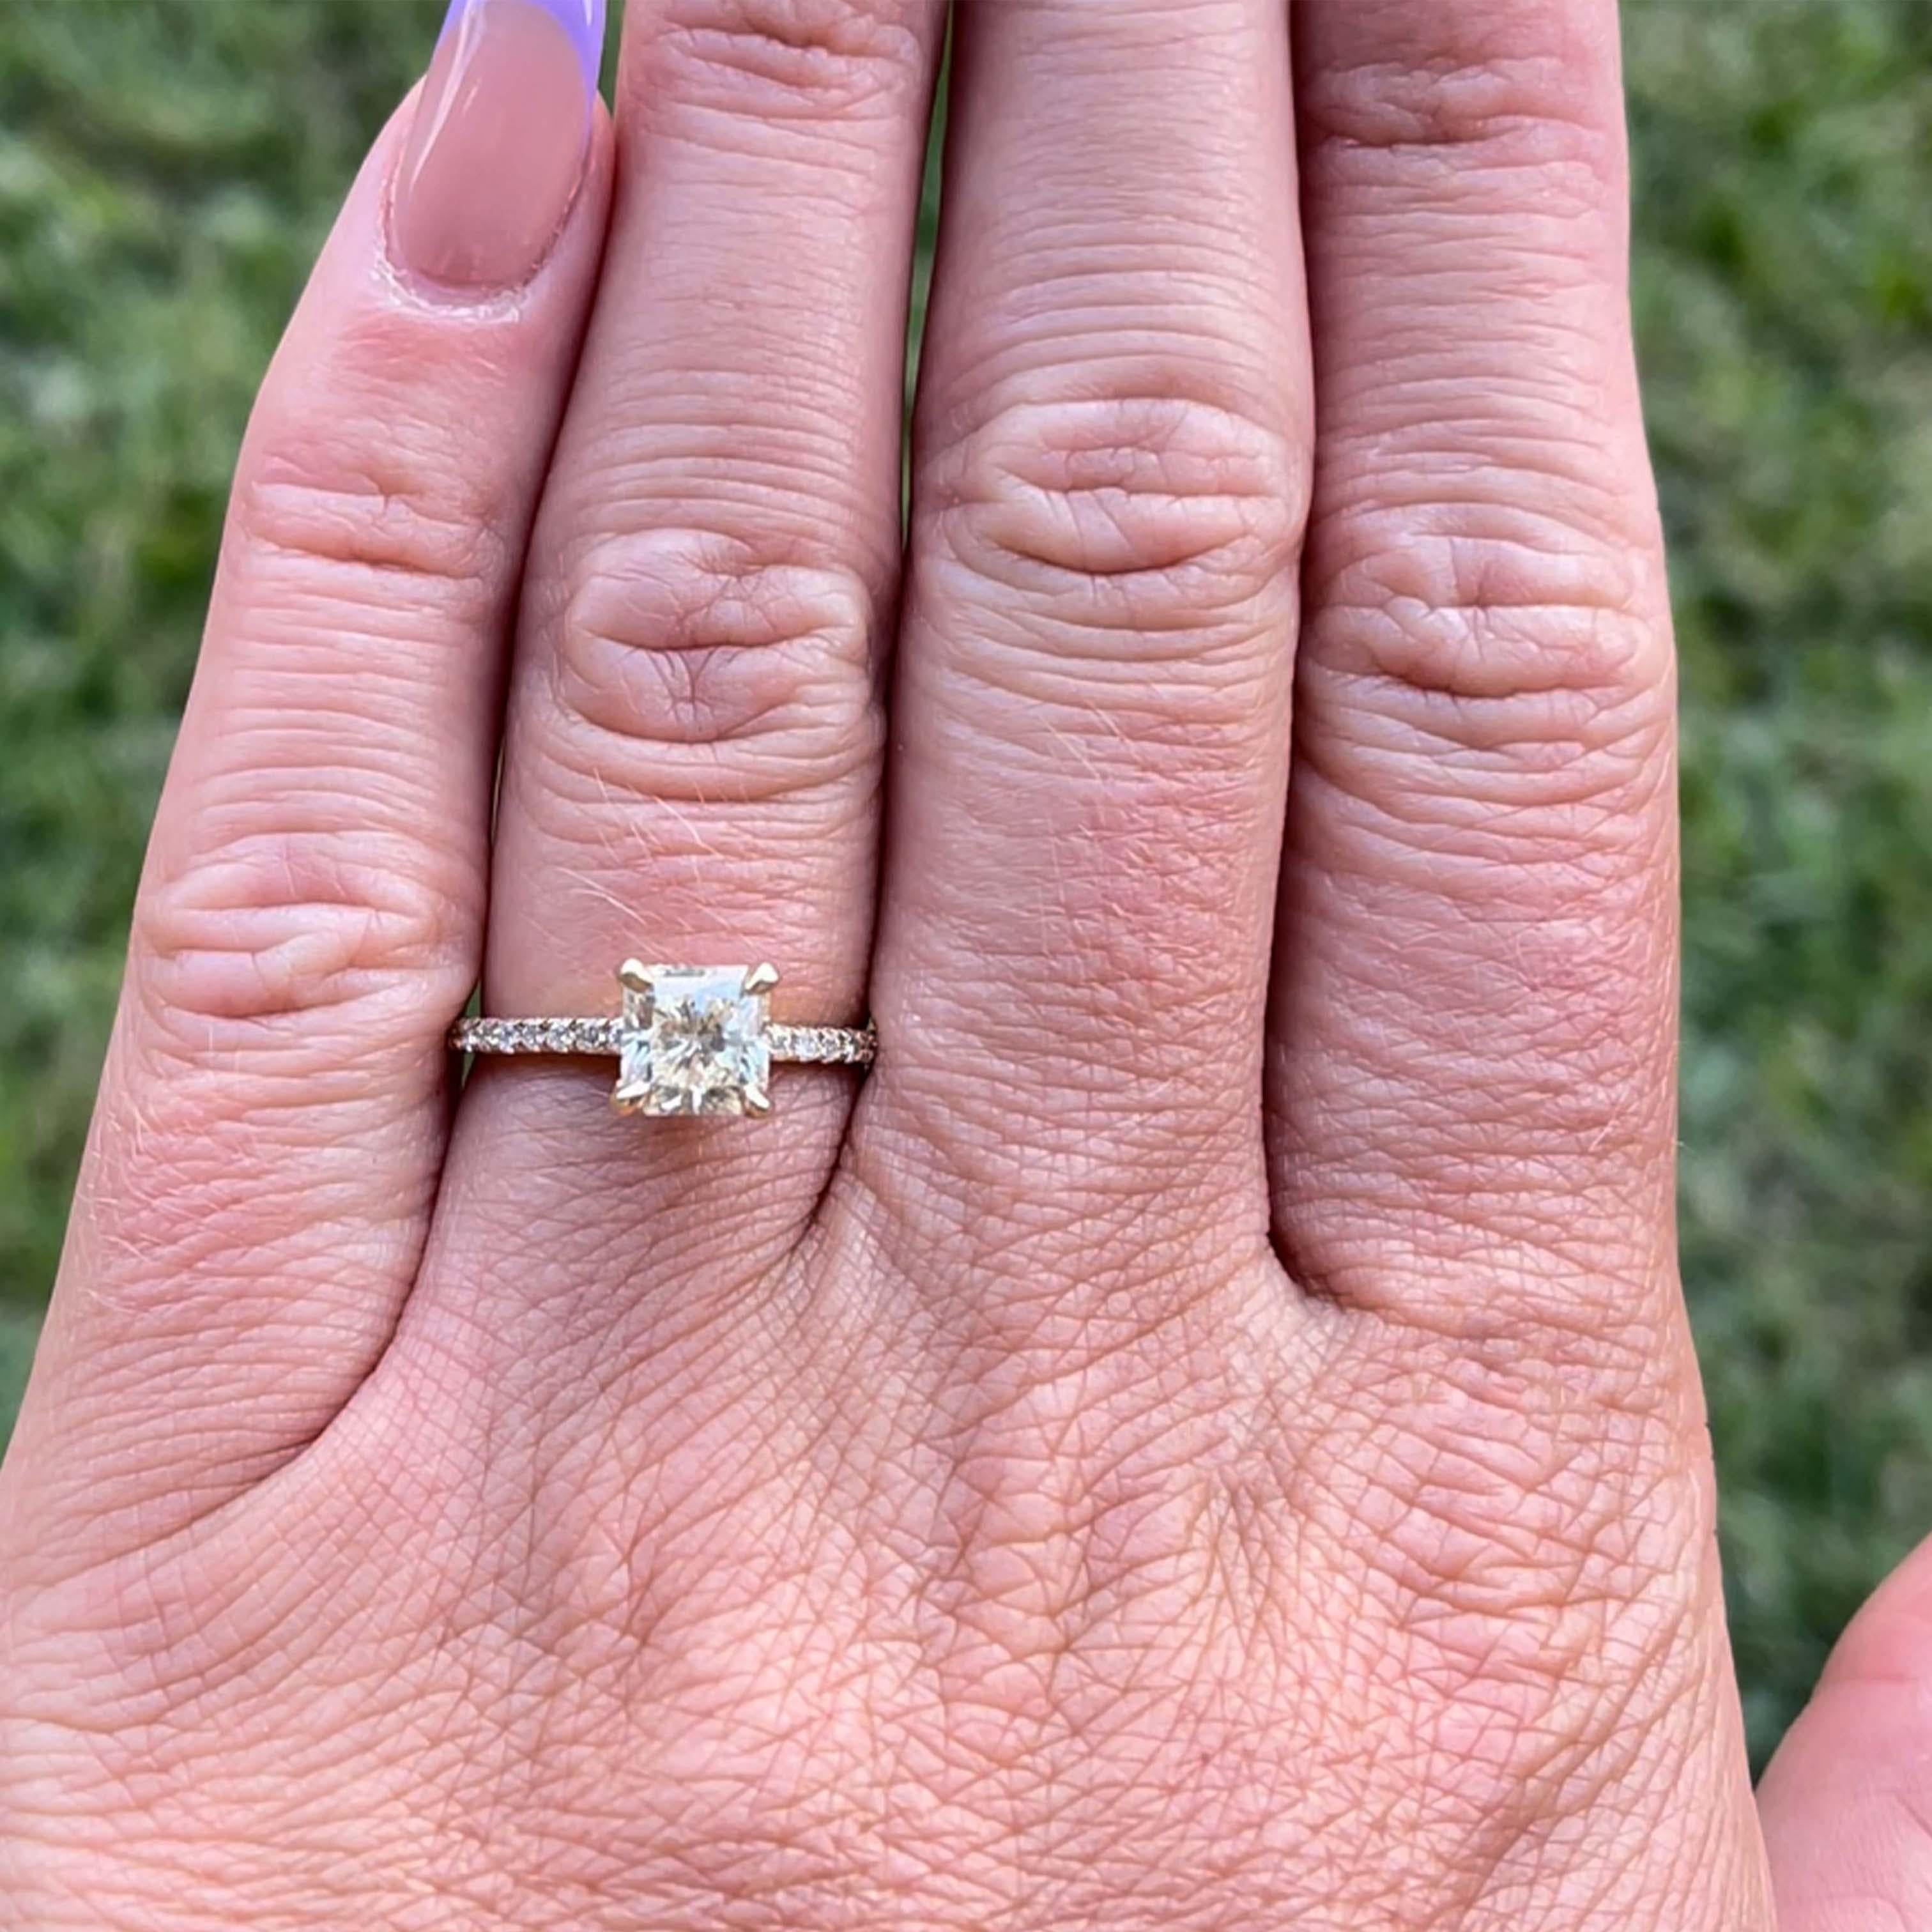 Radiant Cut 1.23 Carat Center Stone Diamond Engagement Ring - 14k Yellow Gold. The 1.23 carat center stone on this beautiful engagement ring is N in color and SI1 in clarity. The ring has an additional 20 diamonds on the shank, 10 on each shoulder